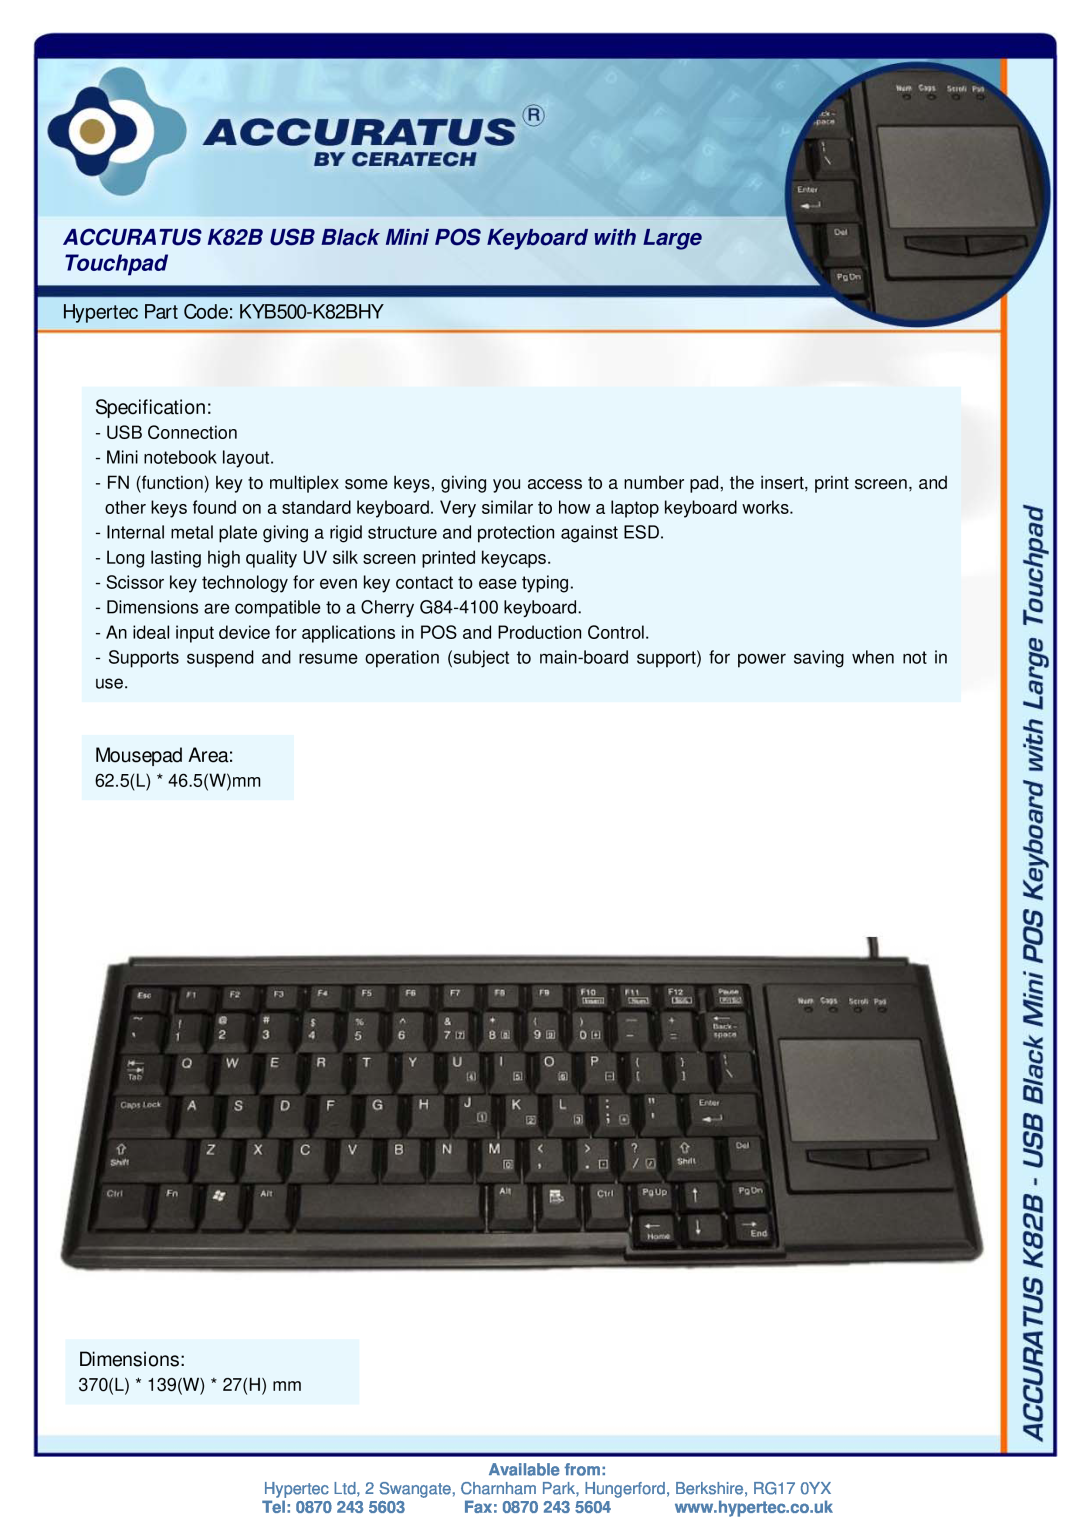 Hypertec KYB500-K82BHY dimensions ACCURATUS K82B USB Black Mini POS Keyboard with Large Touchpad, Mousepad Area 